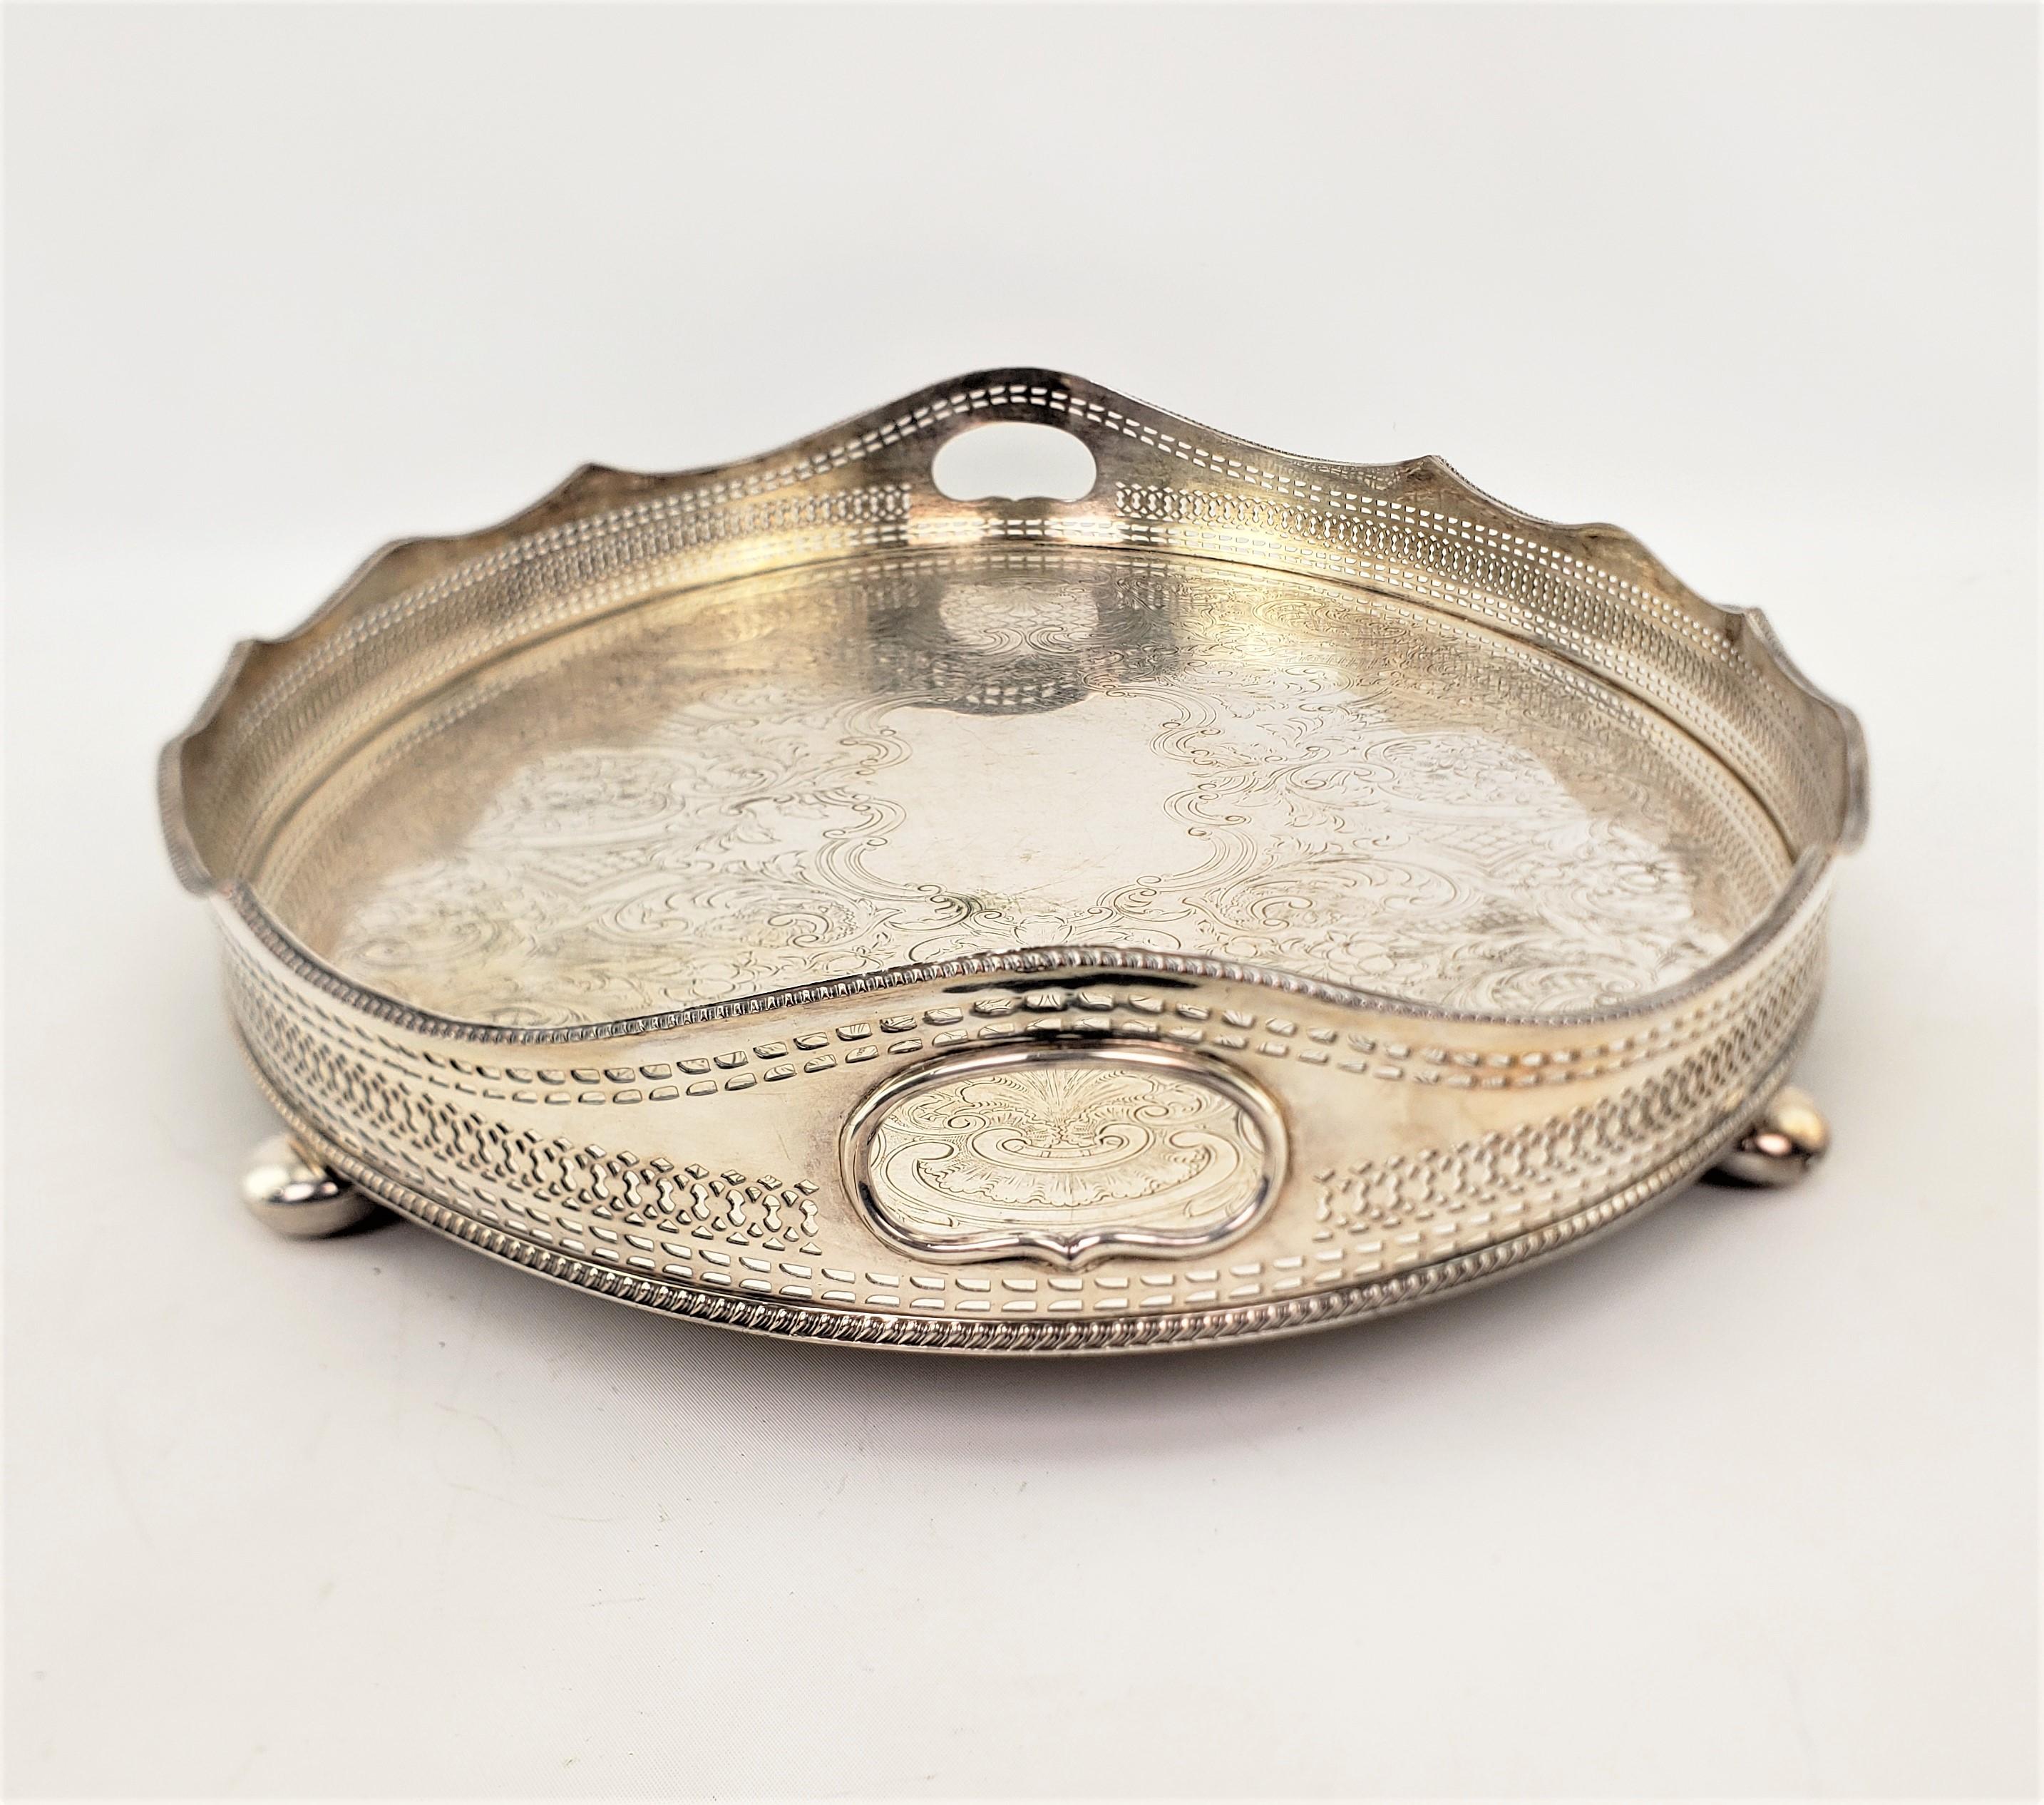 Antique Barker-Ellis Silver Plated Gallery Serving Tray with Ornate Engraving For Sale 2